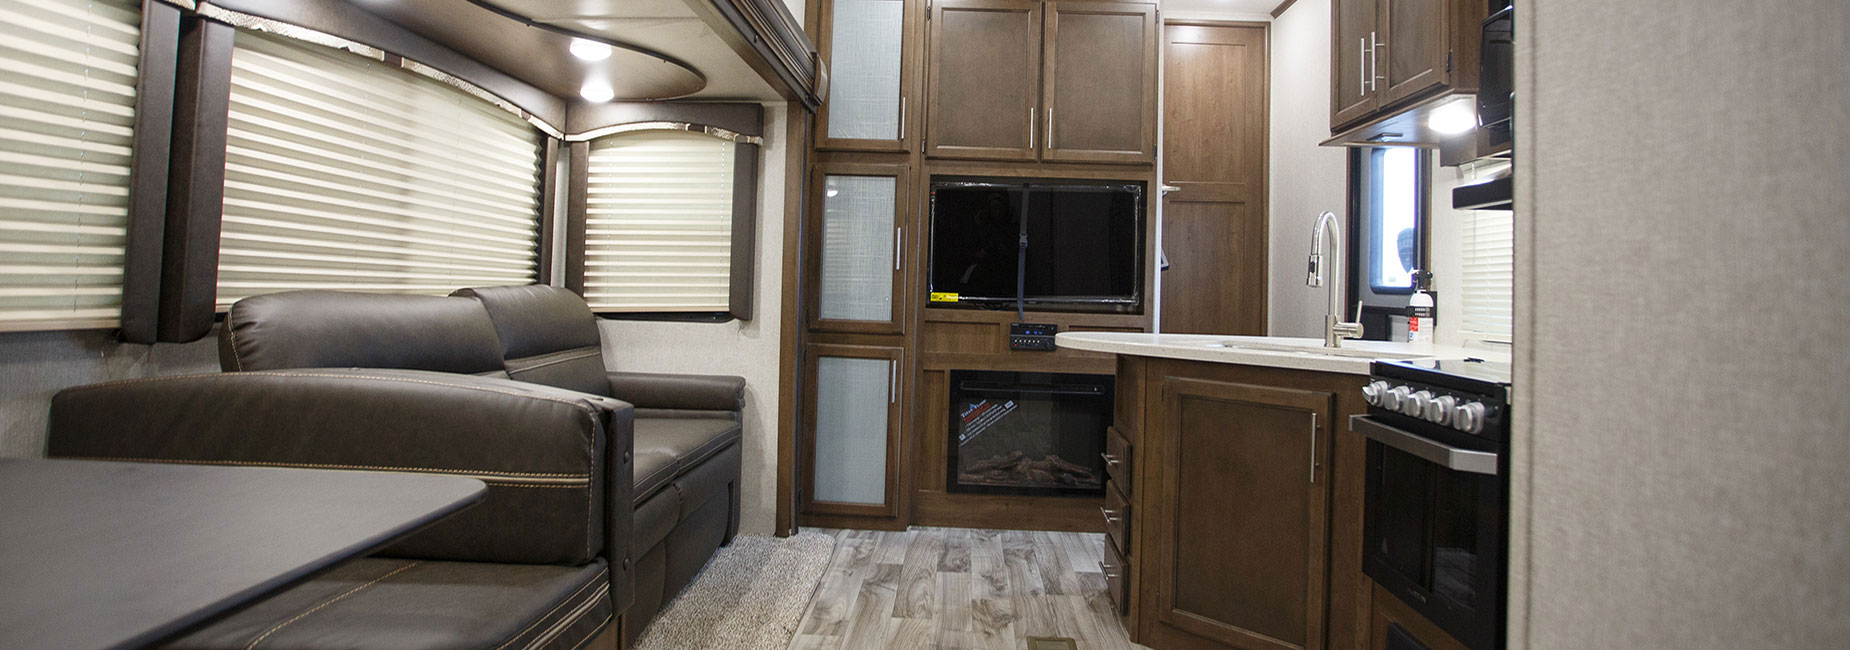 Let Keystone RV Services ensure that your plumbing system is working properly in order to avoid any surprises when you're in the middle of nowhere!